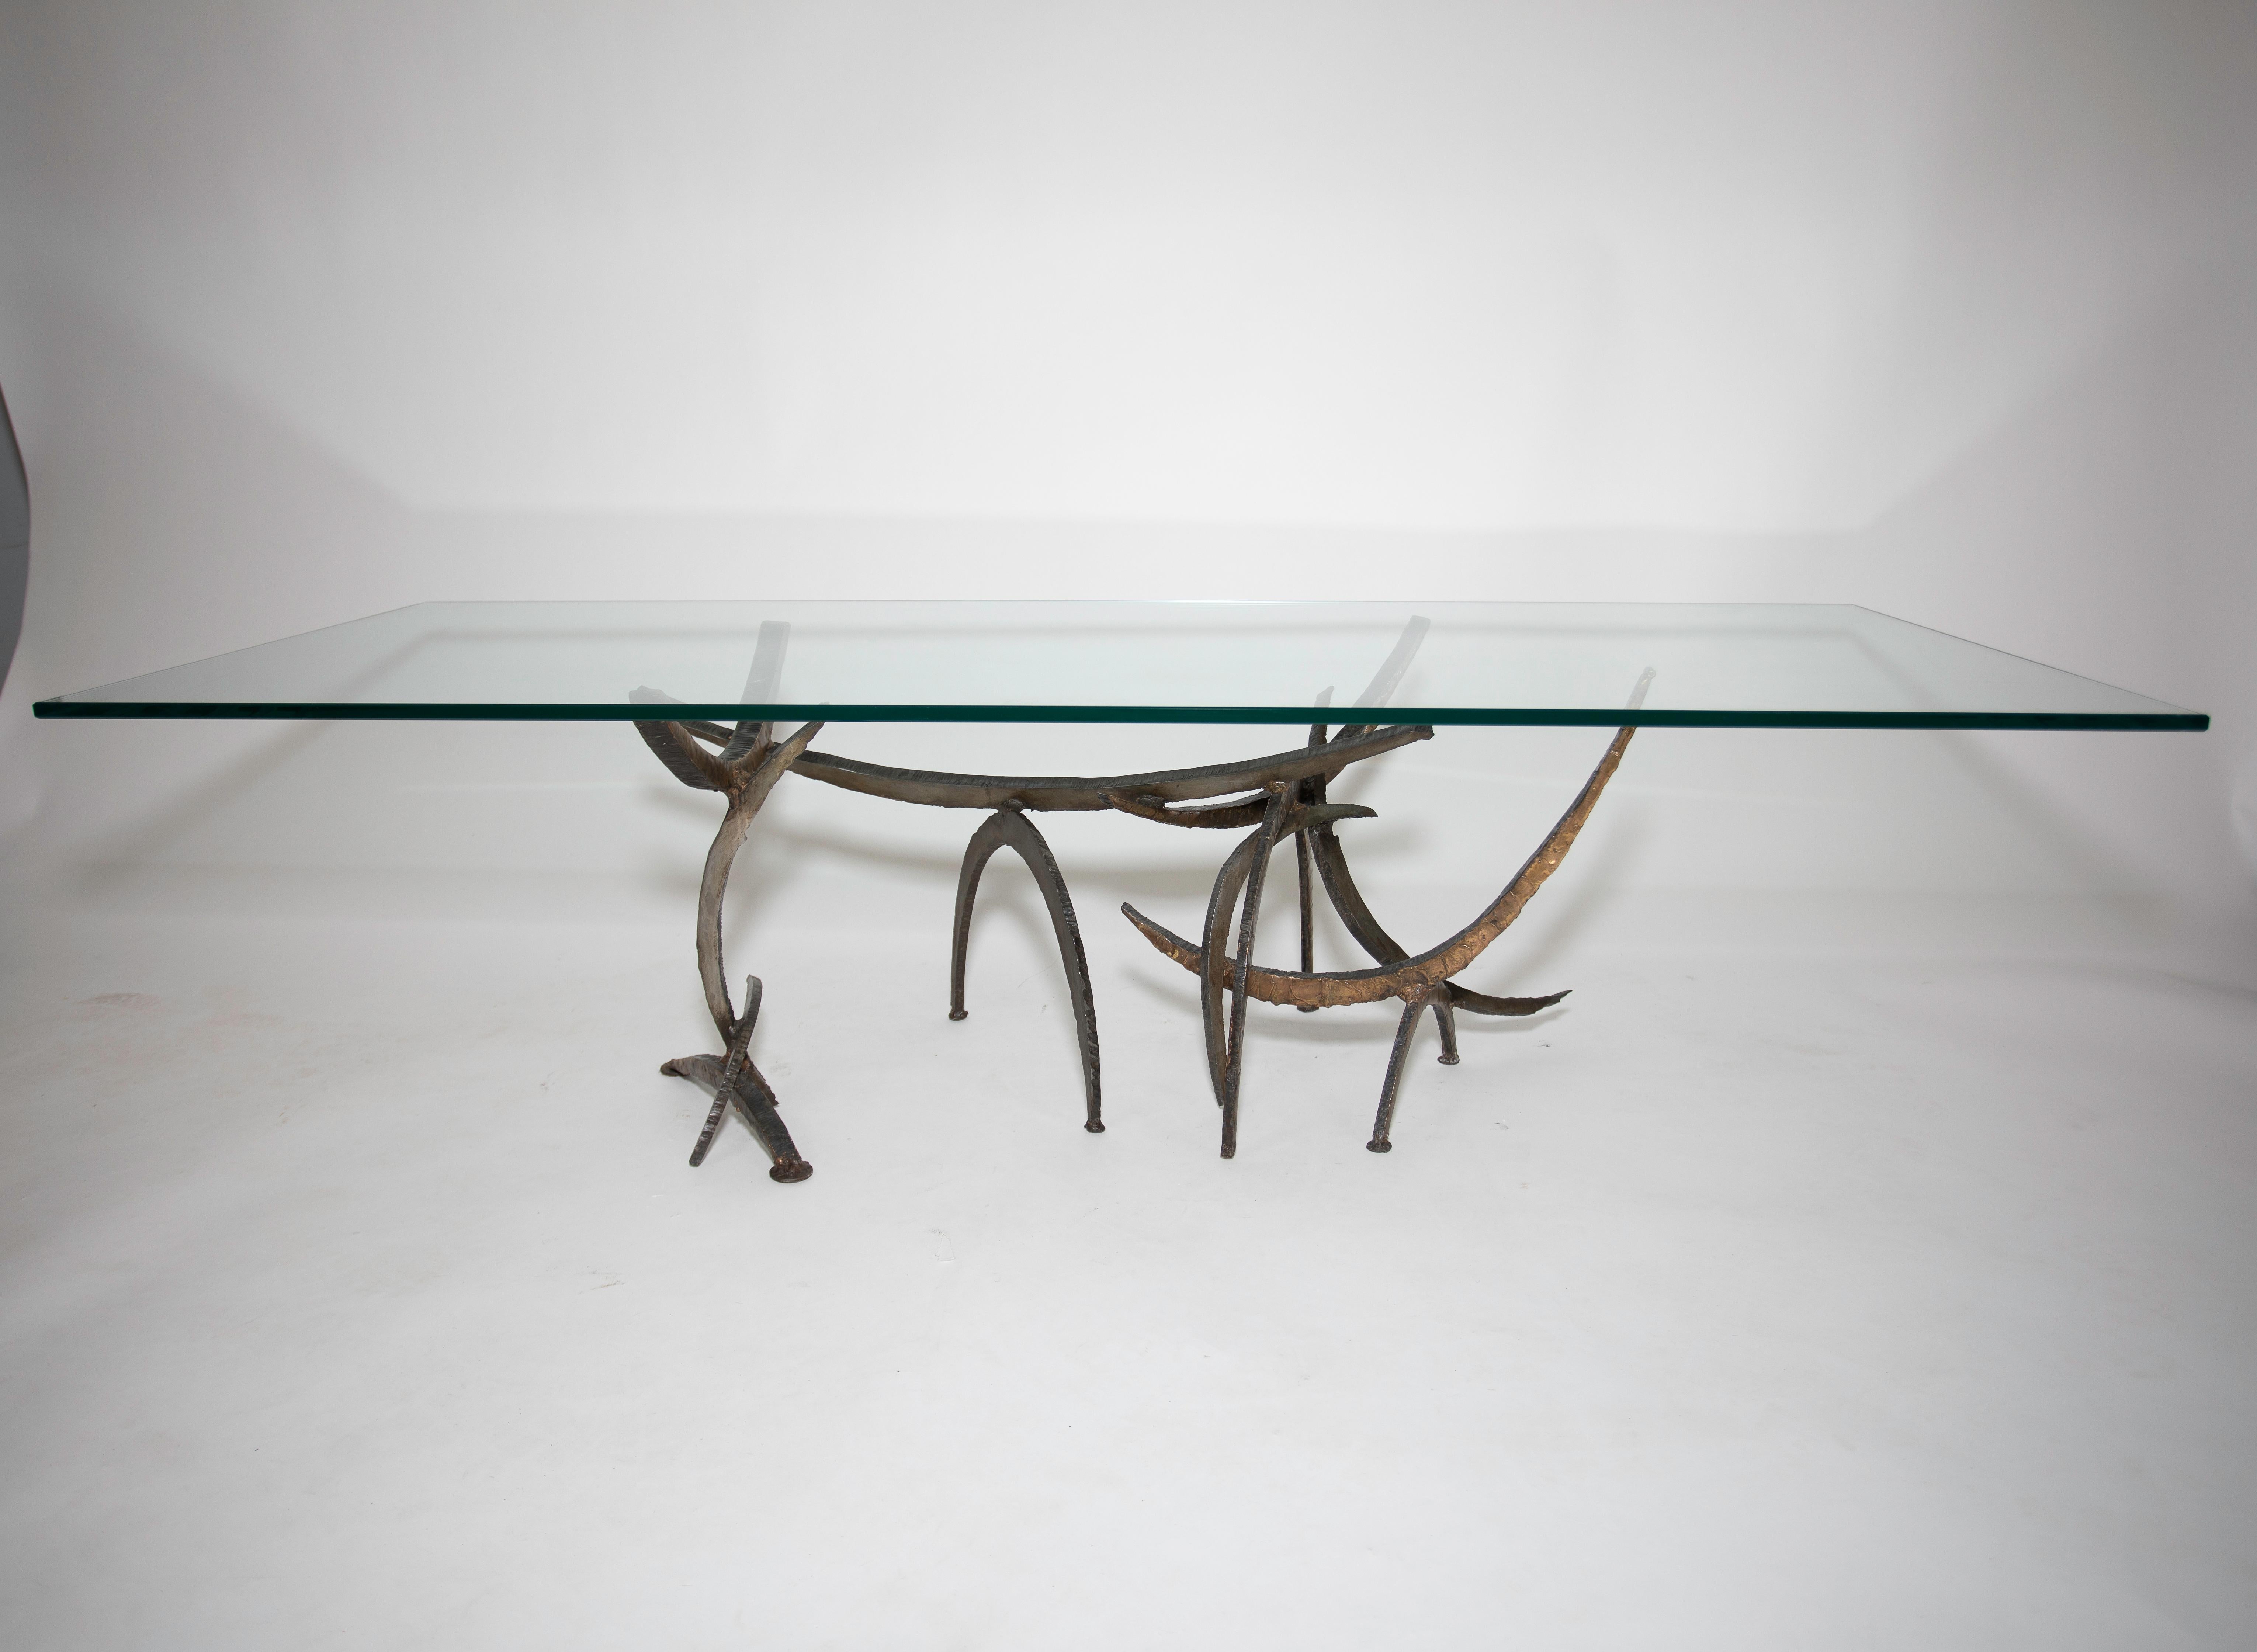 Silas Seandel Ortago coffee table
Steel and Bronze
Replaced Glass Top.